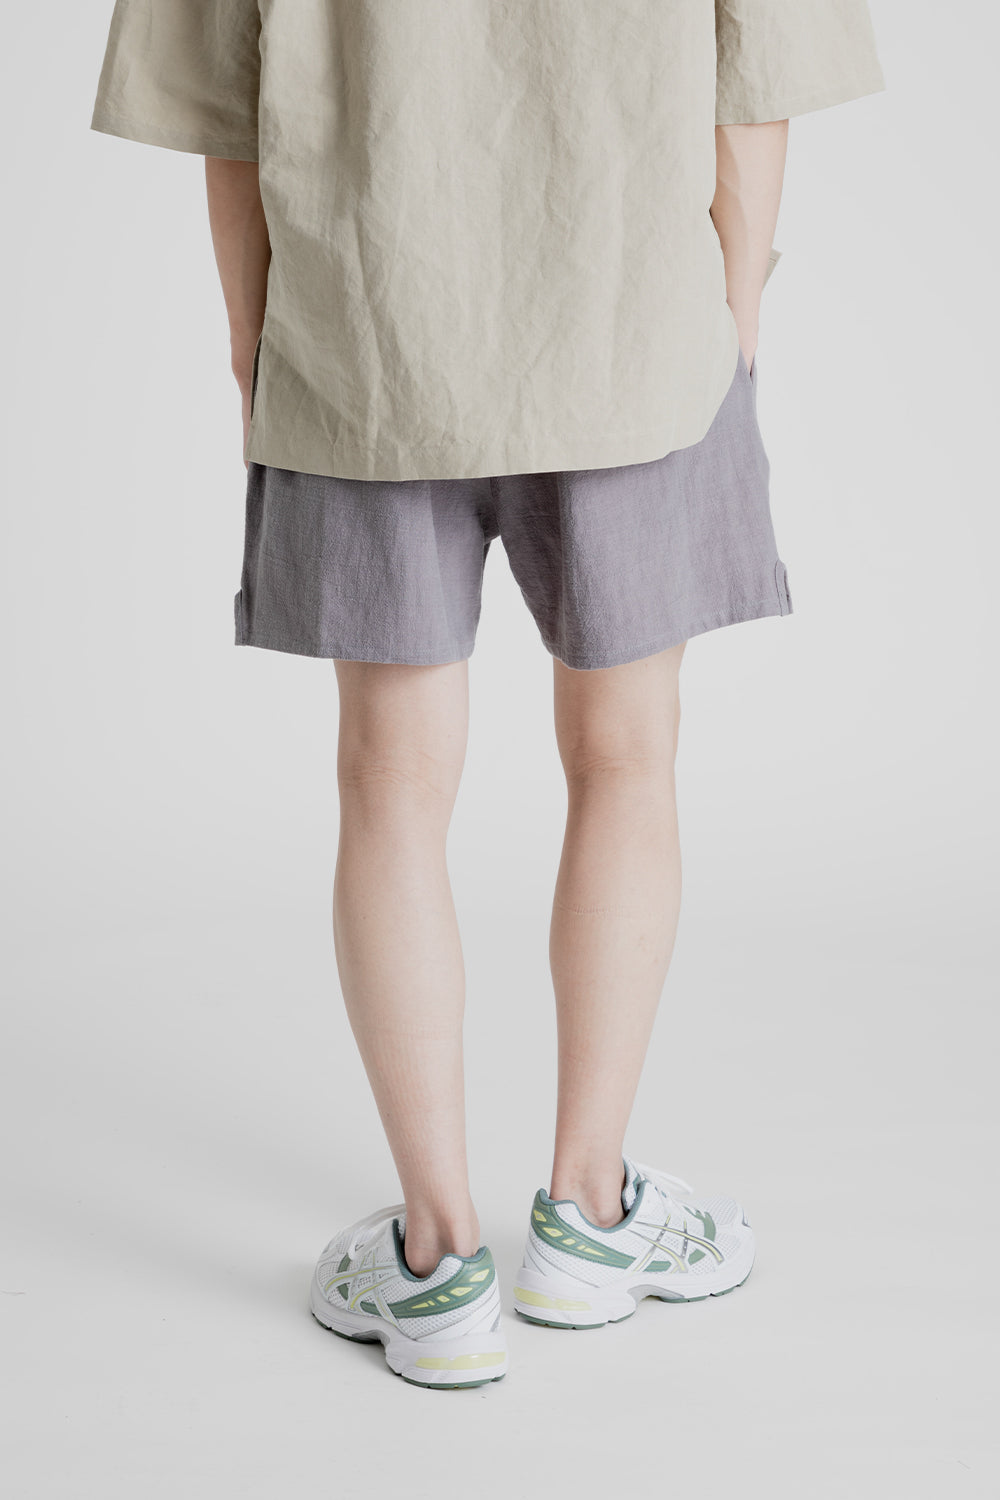 S.K Manor Hill MT Shorts in Grey Ramie